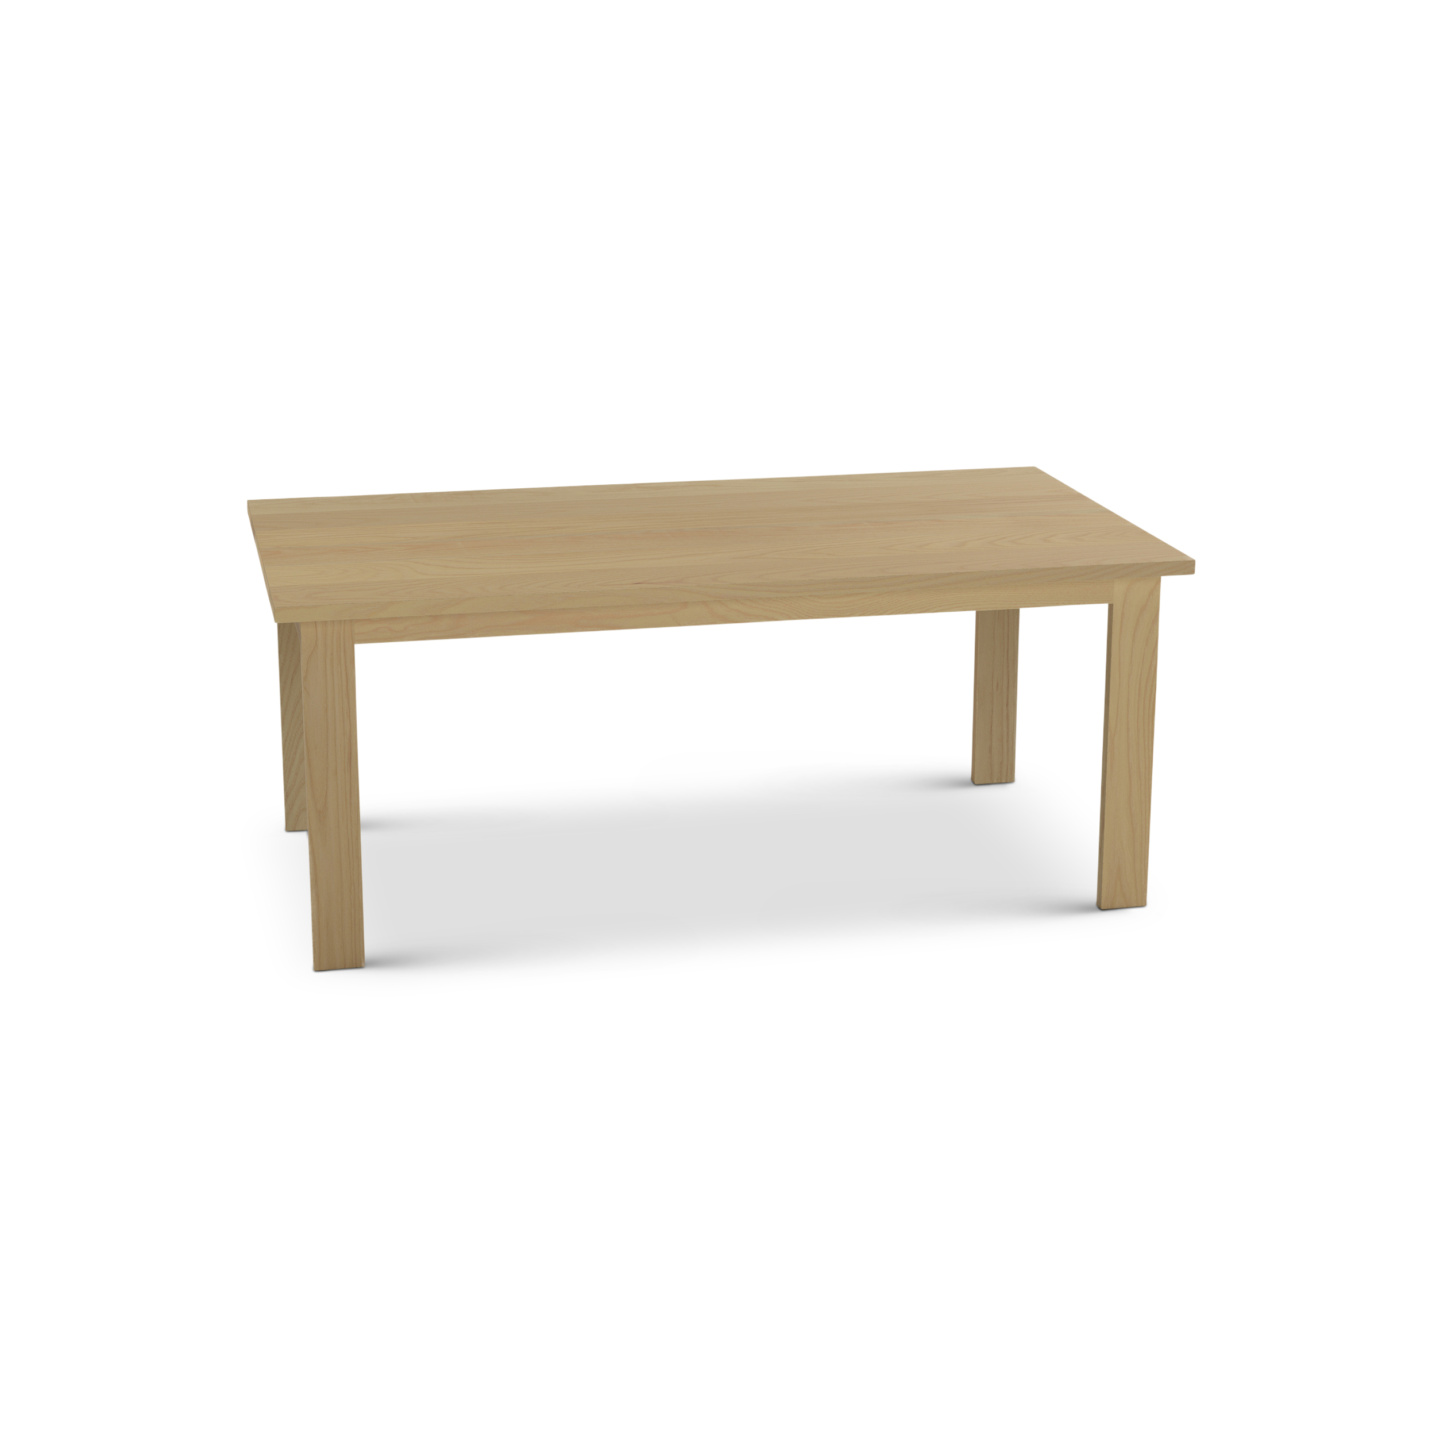 Solid Ash Wood Table in a Nordic Style